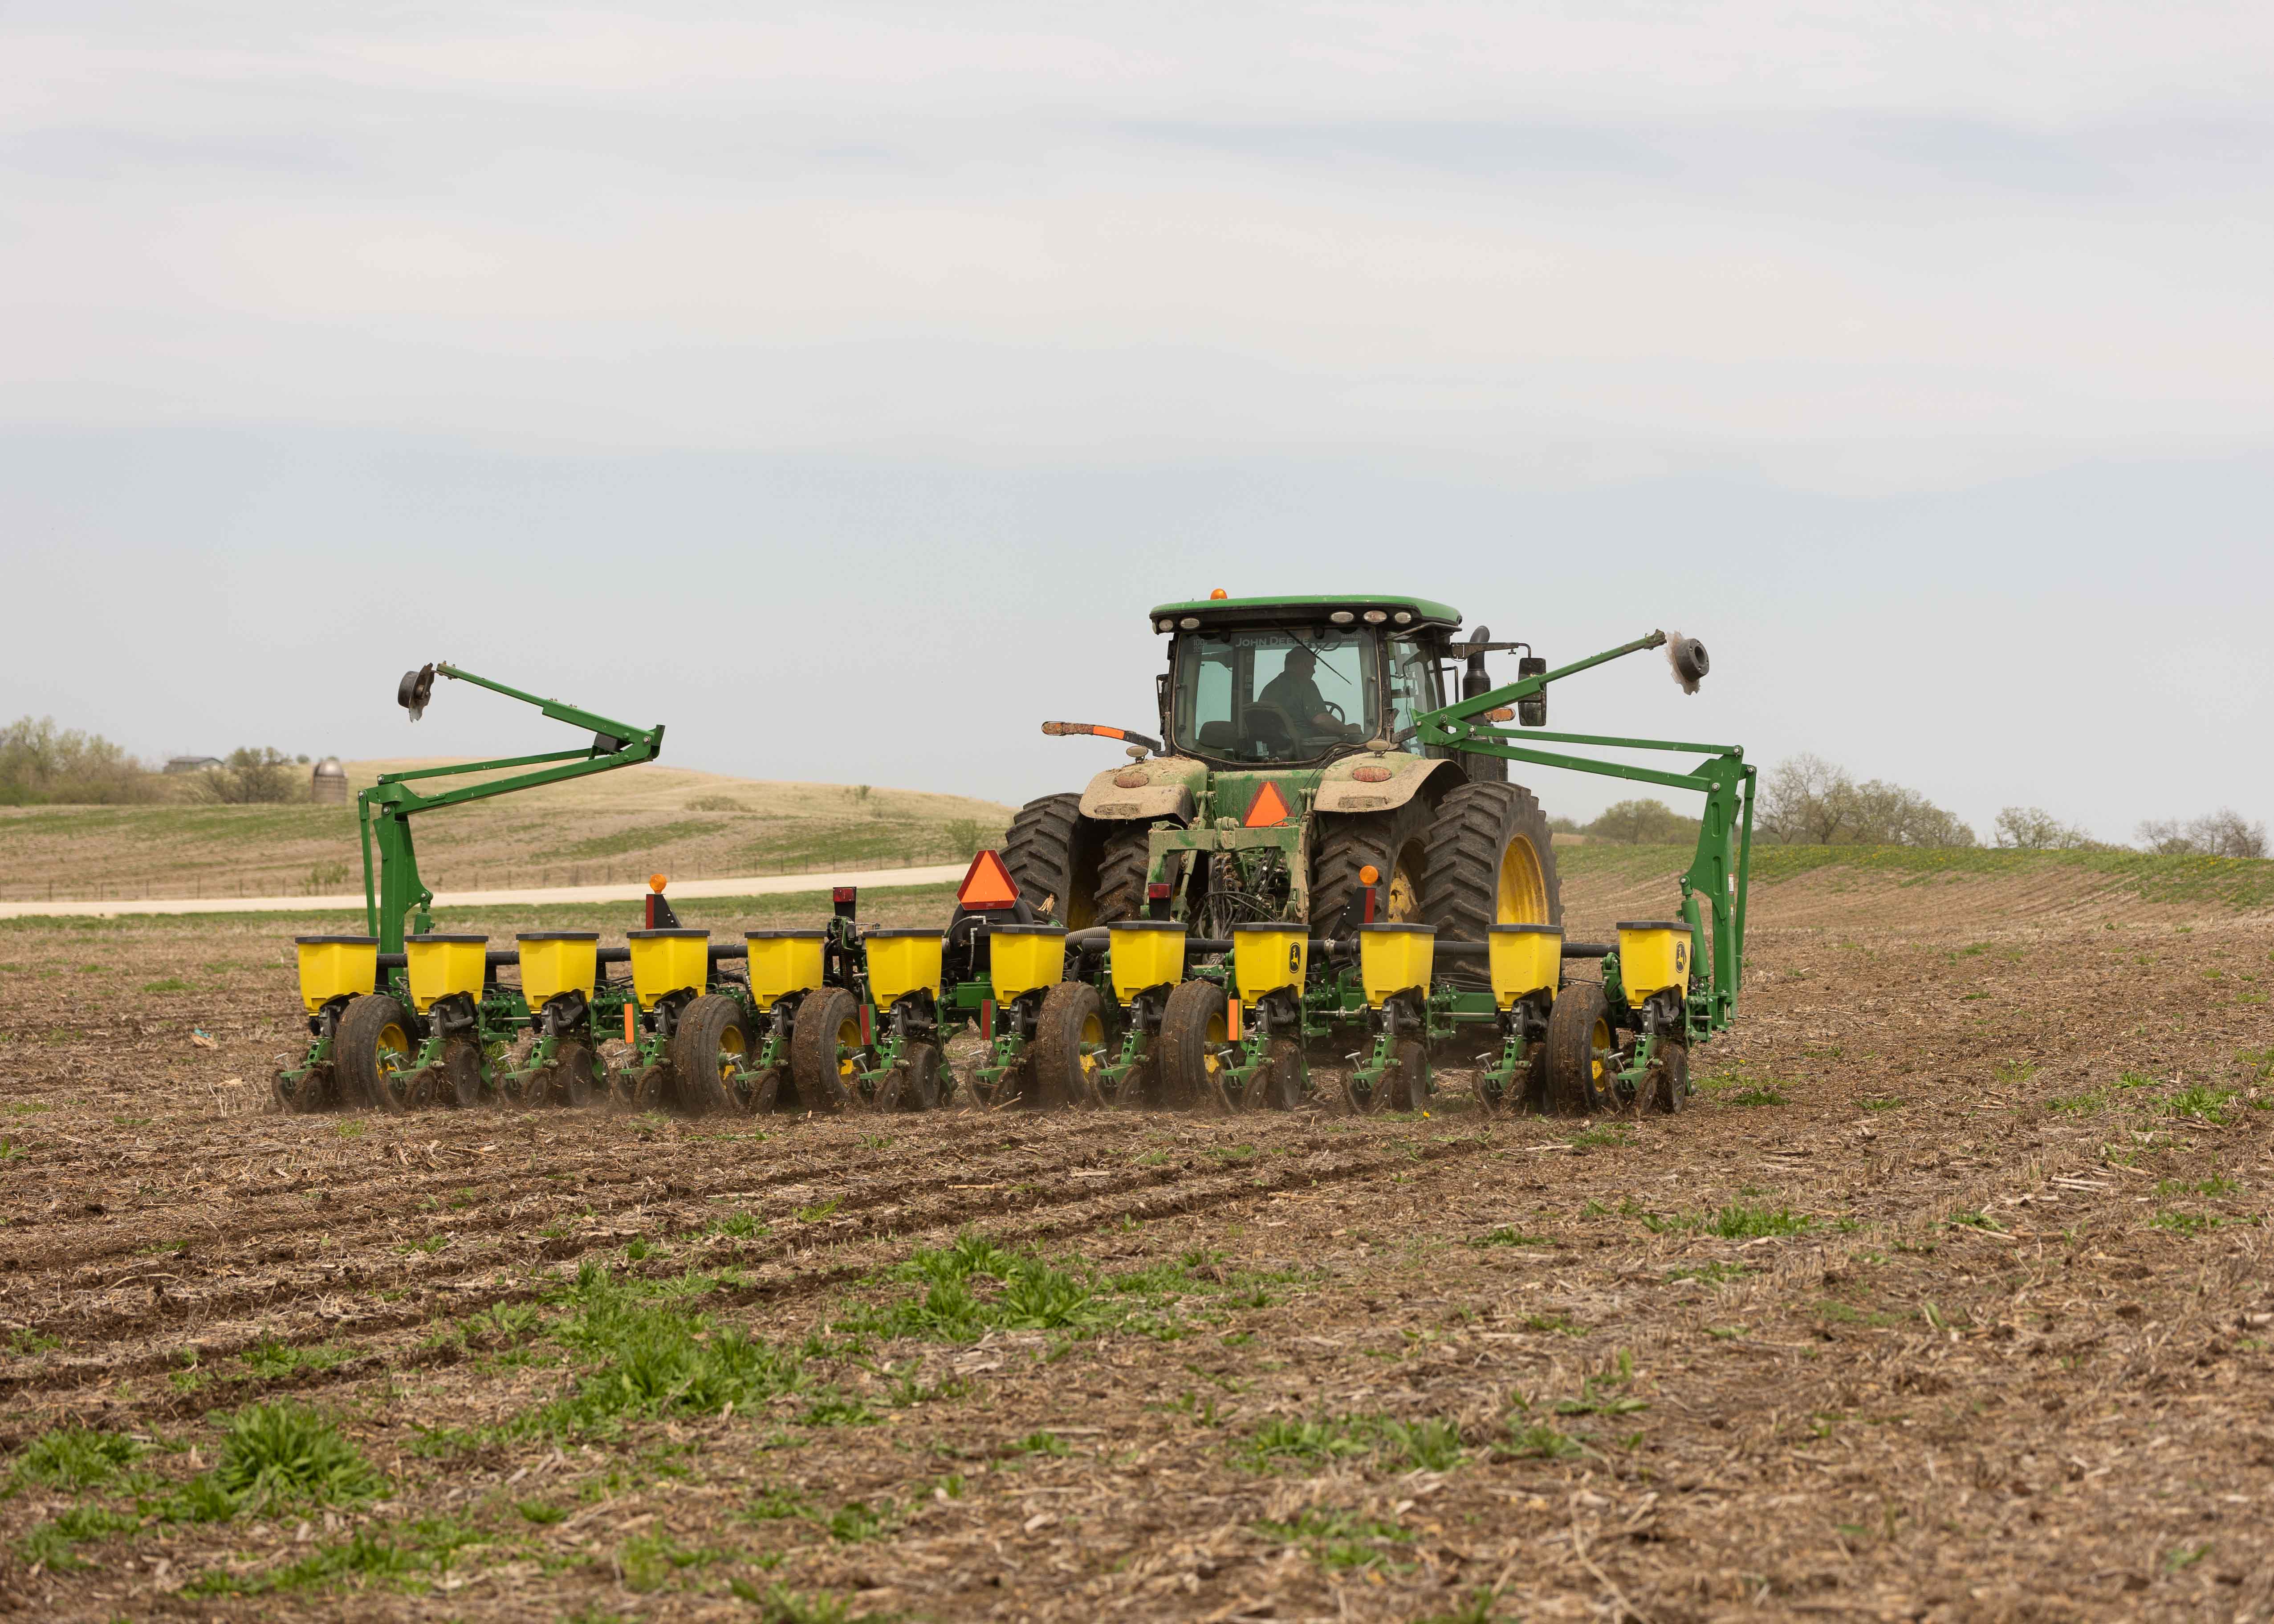 As farmers wrap up planting for the 2022 growing season